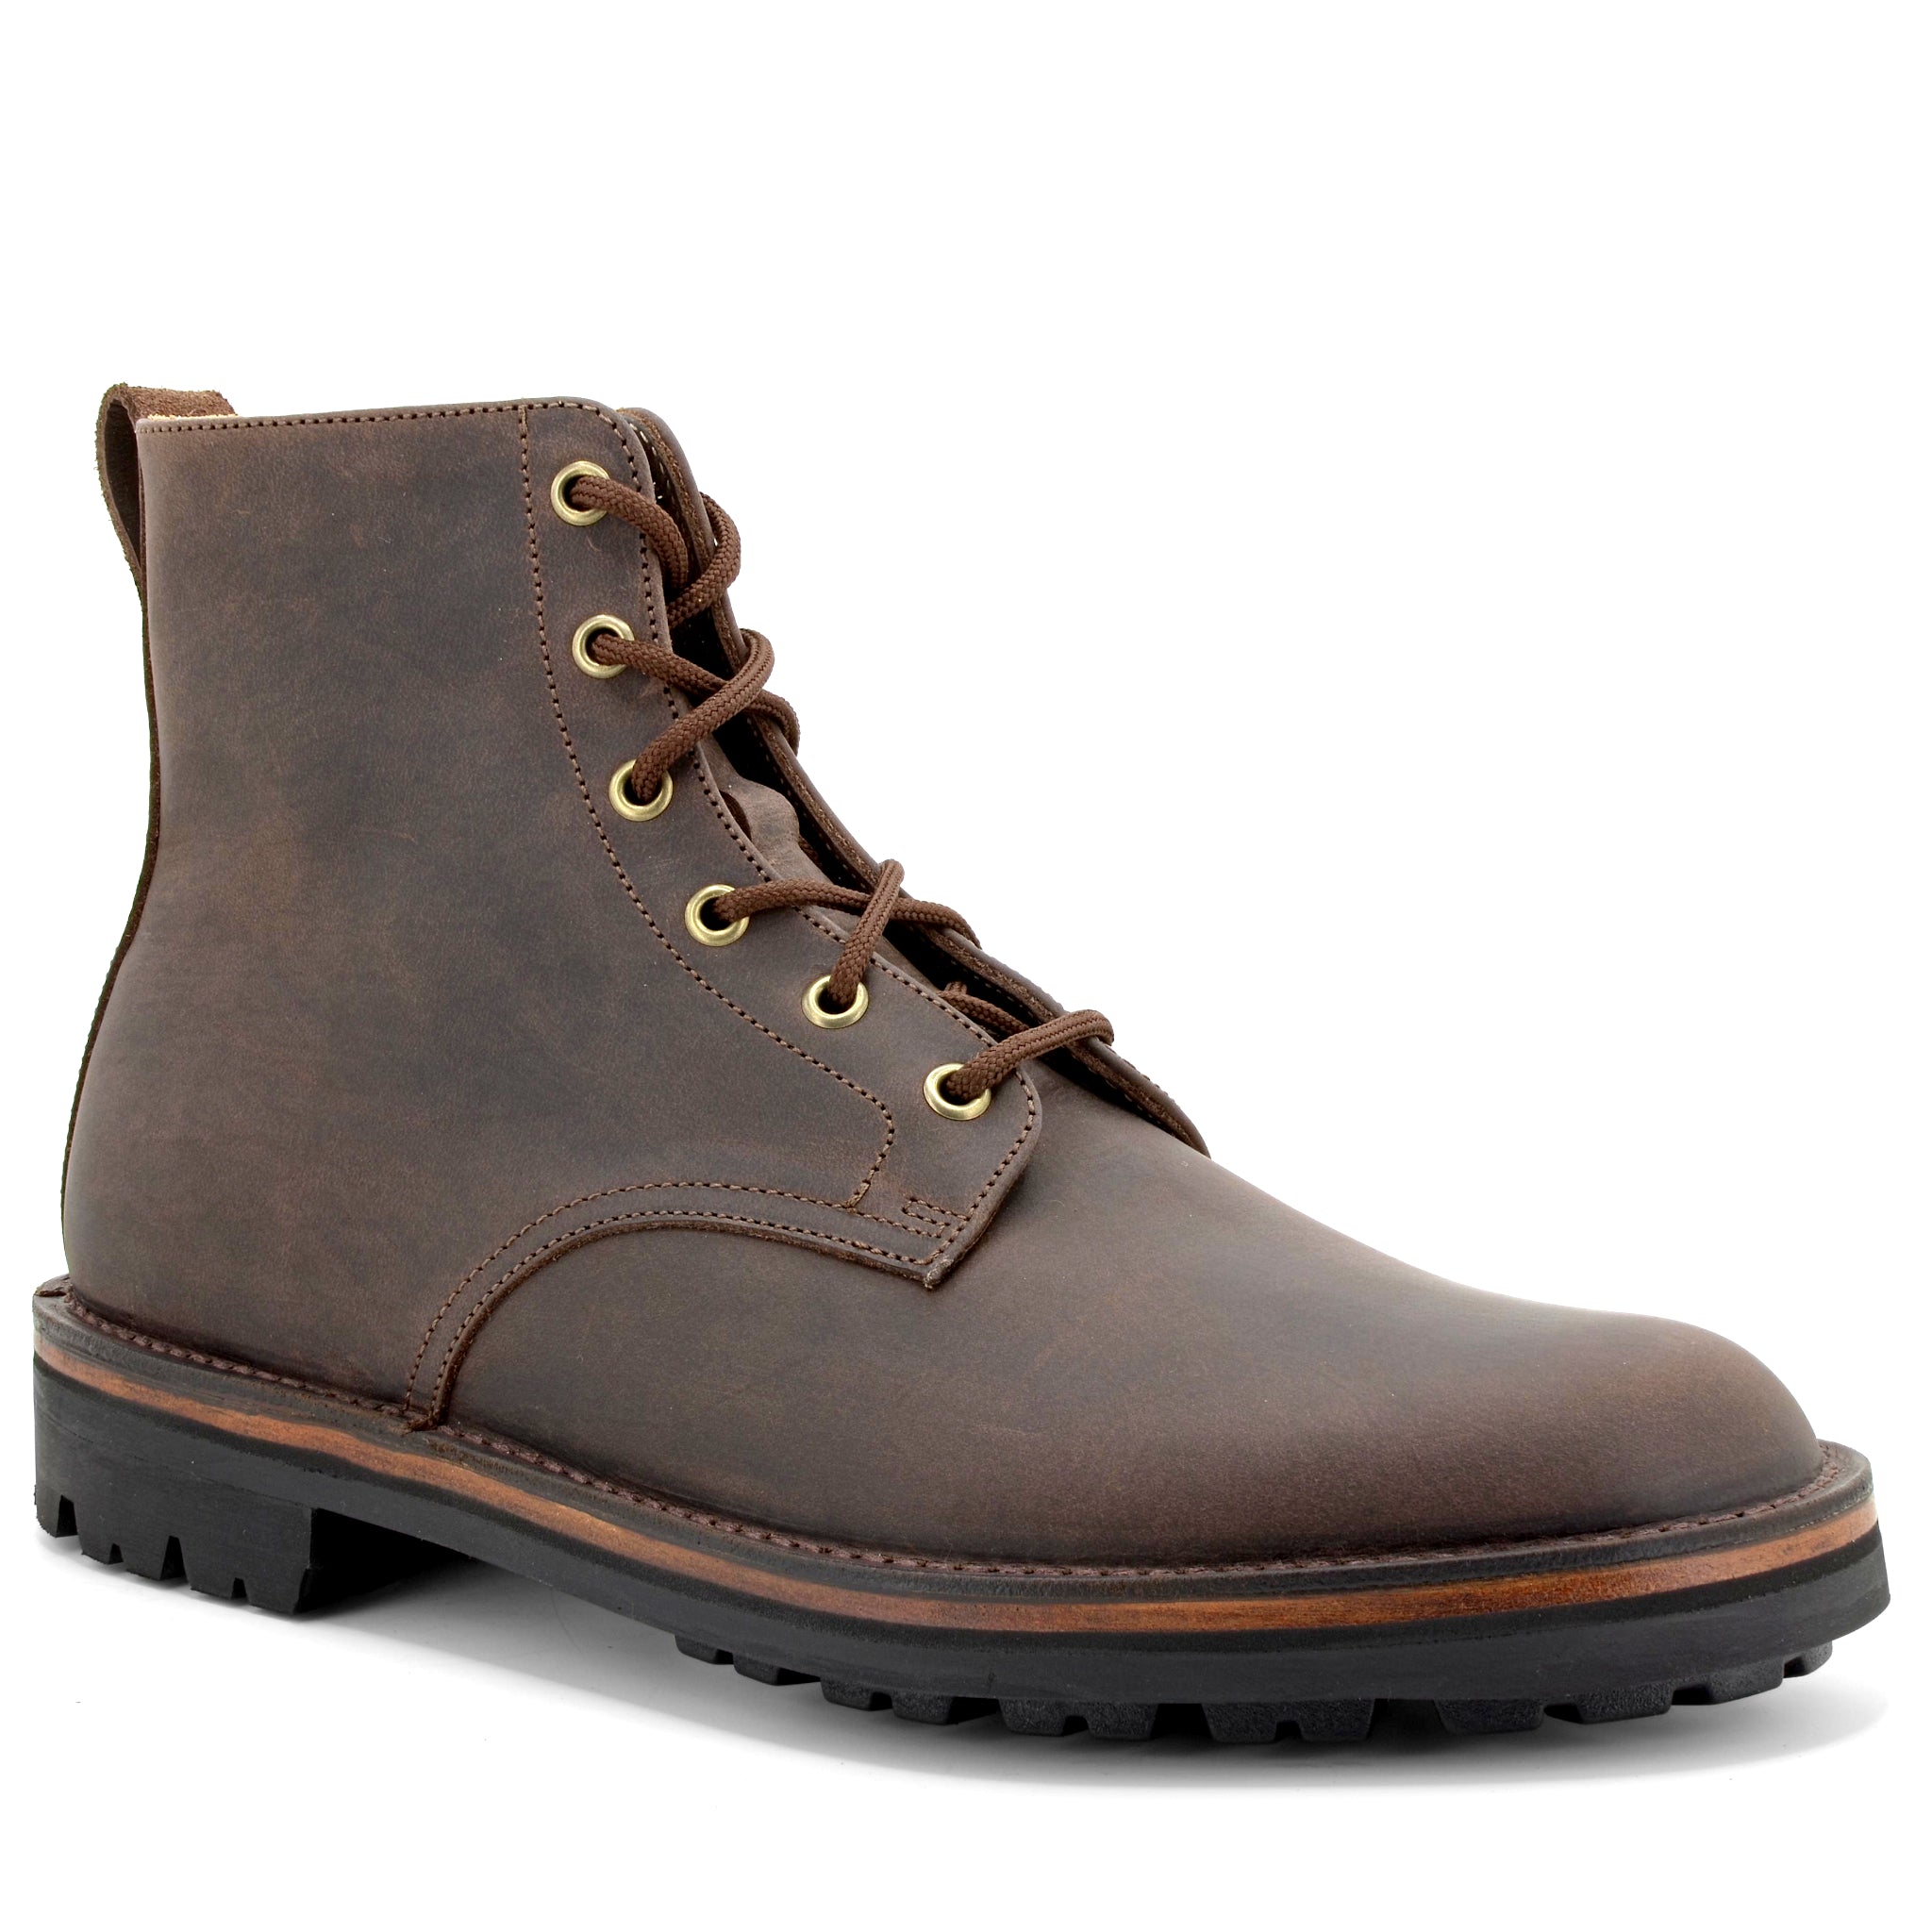 Desert Walking Boots Oiled Leather - Bark Brown - MADE IN ENGLAND ...